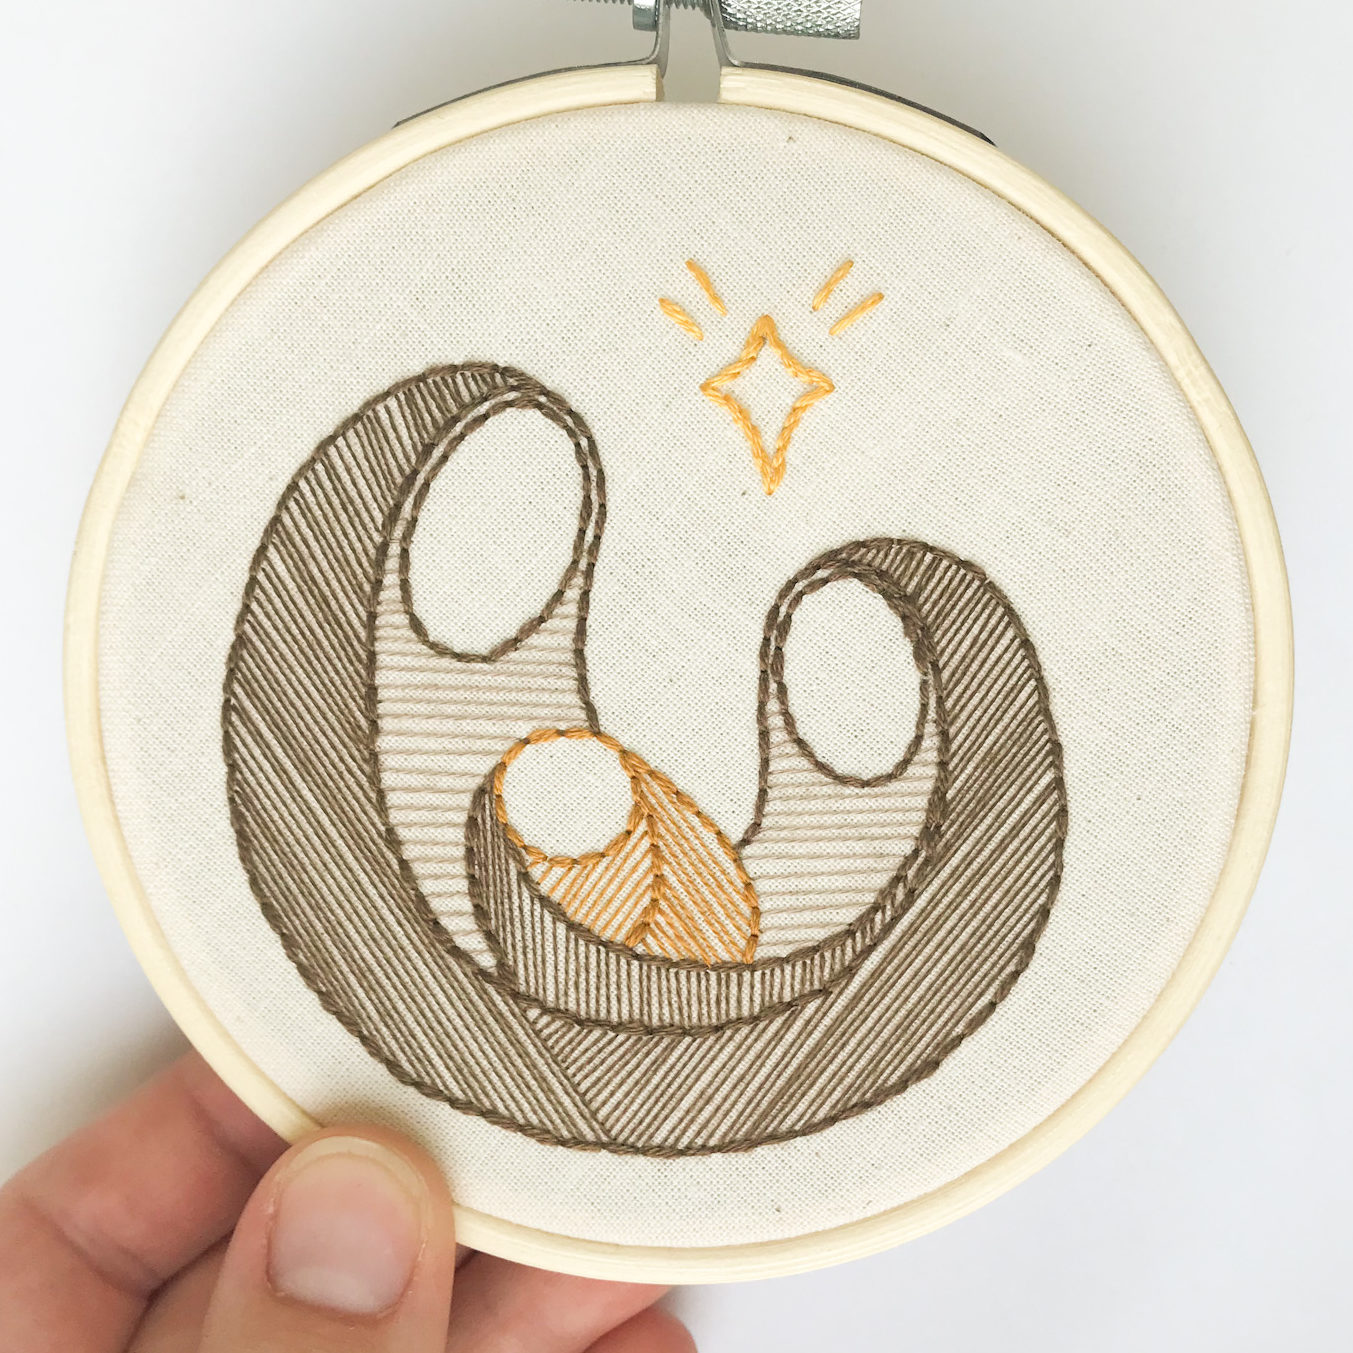 DIY Christmas Ornament, simple Nativity scene of Joseph, Mary and baby Jesus. Hand stitched embroidery hoop. 